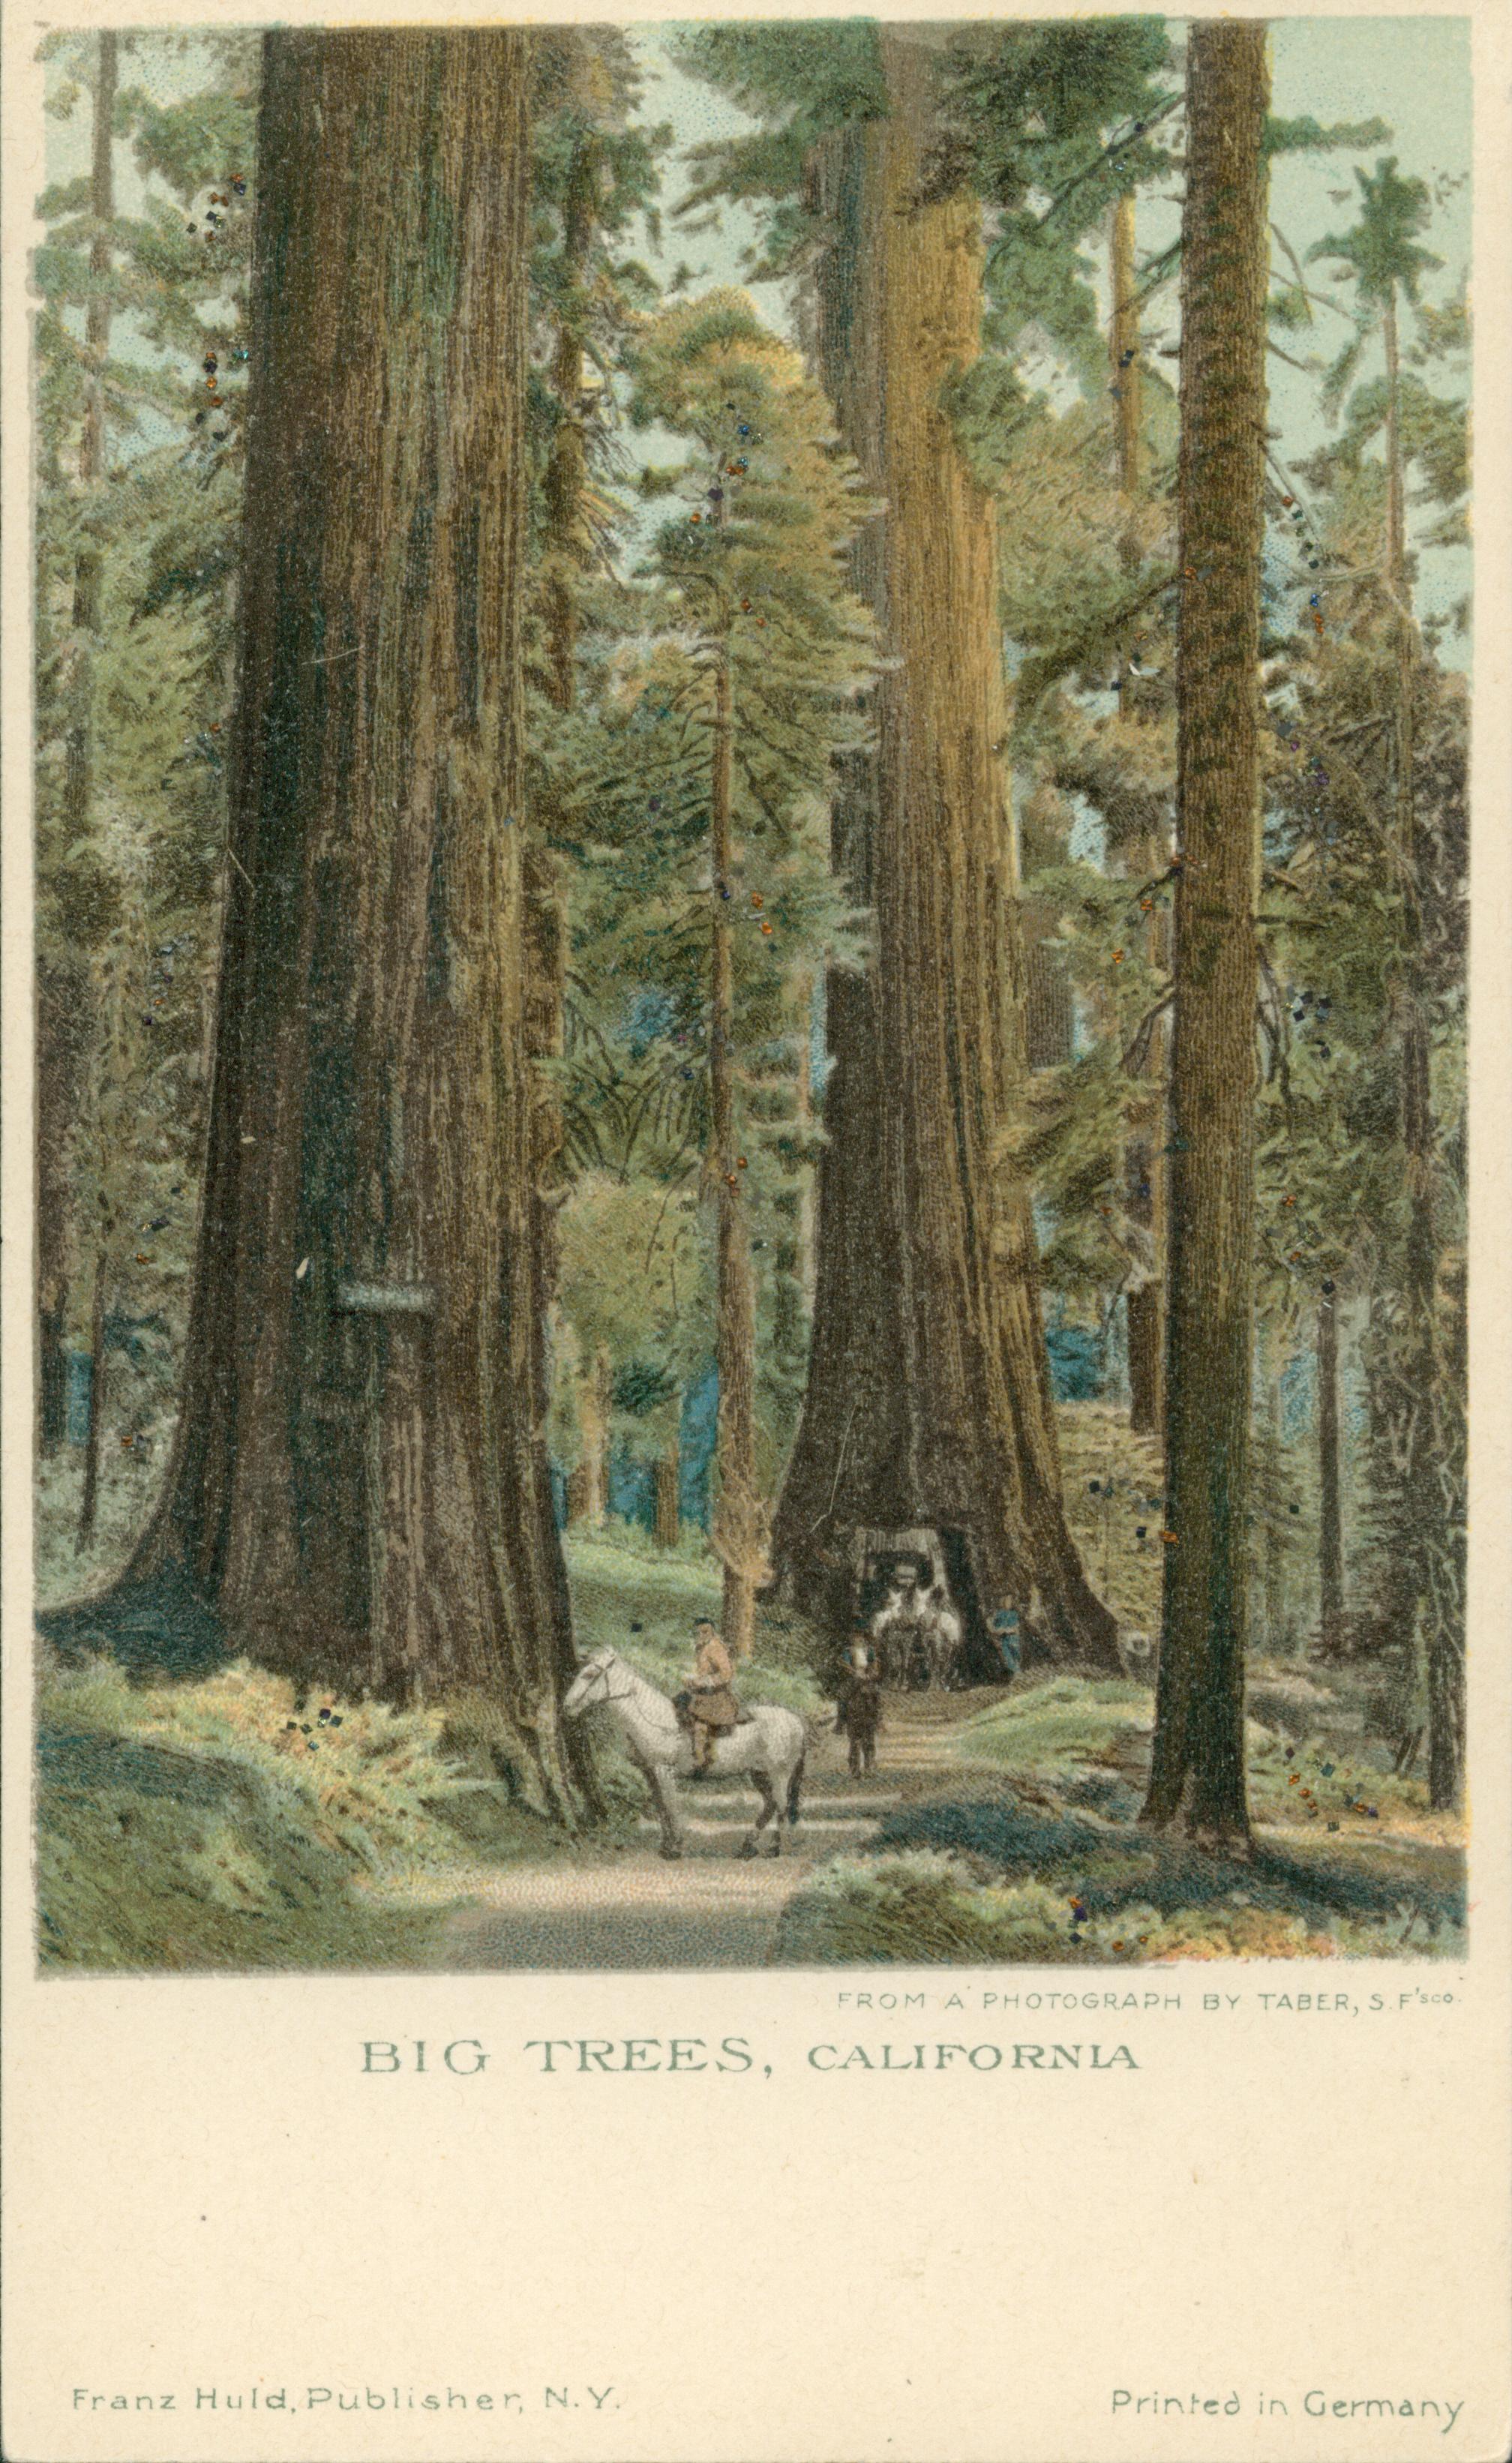 Shows a carriage driving through the Wawona tree with a horse and rider in front